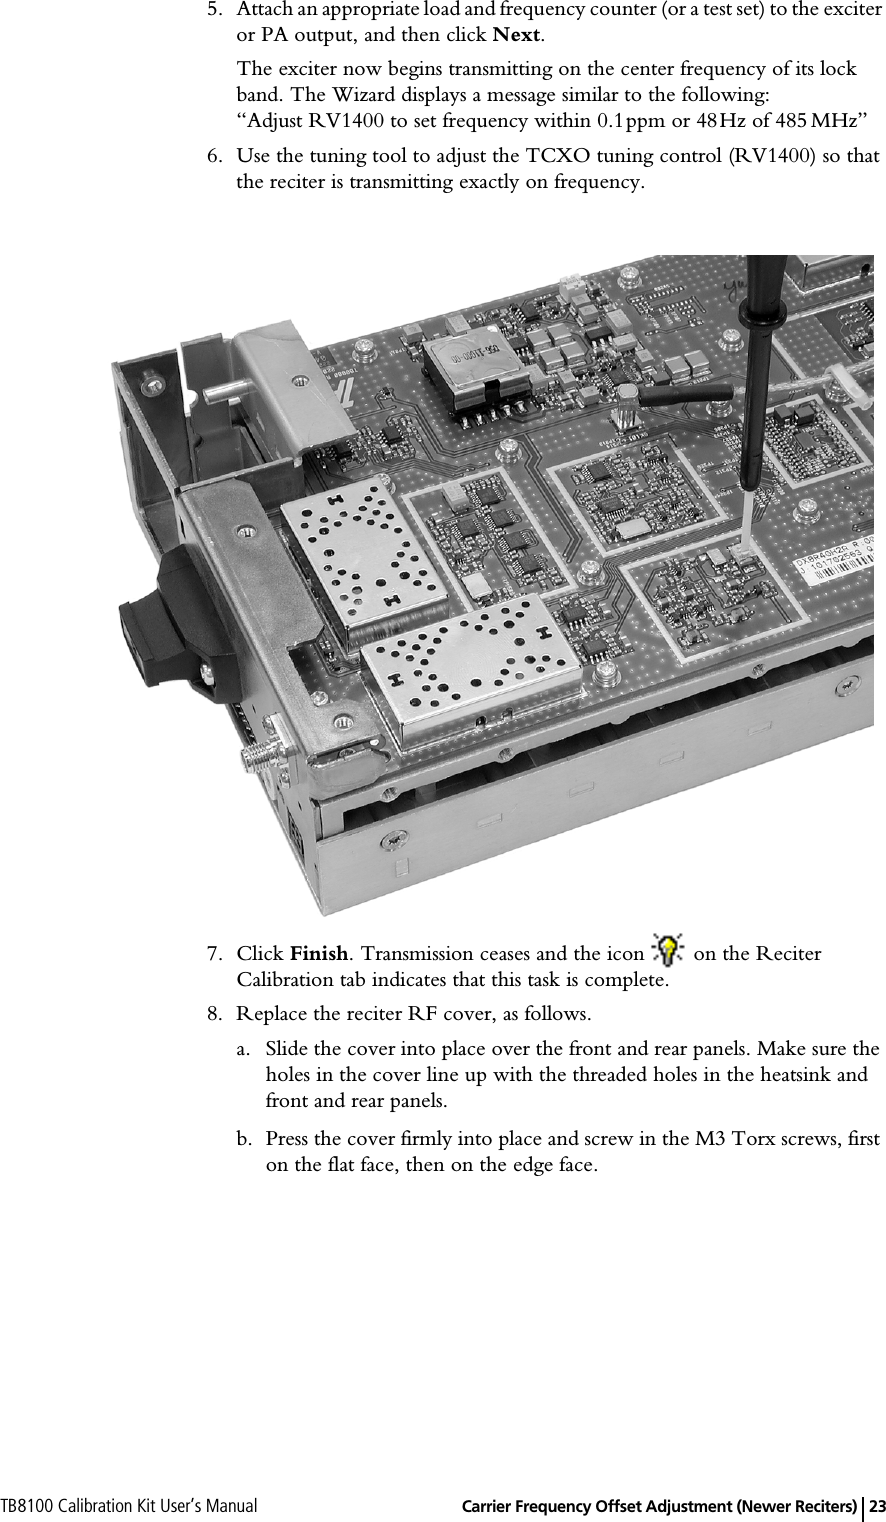 TB8100 Calibration Kit User’s Manual   Carrier Frequency Offset Adjustment (Newer Reciters) 235. Attach an appropriate load and frequency counter (or a test set) to the exciter or PA output, and then click Next. The exciter now begins transmitting on the center frequency of its lock band. The Wizard displays a message similar to the following: “Adjust RV1400 to set frequency within 0.1ppm or 48Hz of 485MHz”6. Use the tuning tool to adjust the TCXO tuning control (RV1400) so that the reciter is transmitting exactly on frequency. 7. Click Finish. Transmission ceases and the icon   on the Reciter Calibration tab indicates that this task is complete.8. Replace the reciter RF cover, as follows.a. Slide the cover into place over the front and rear panels. Make sure the holes in the cover line up with the threaded holes in the heatsink and front and rear panels.b. Press the cover firmly into place and screw in the M3 Torx screws, first on the flat face, then on the edge face.